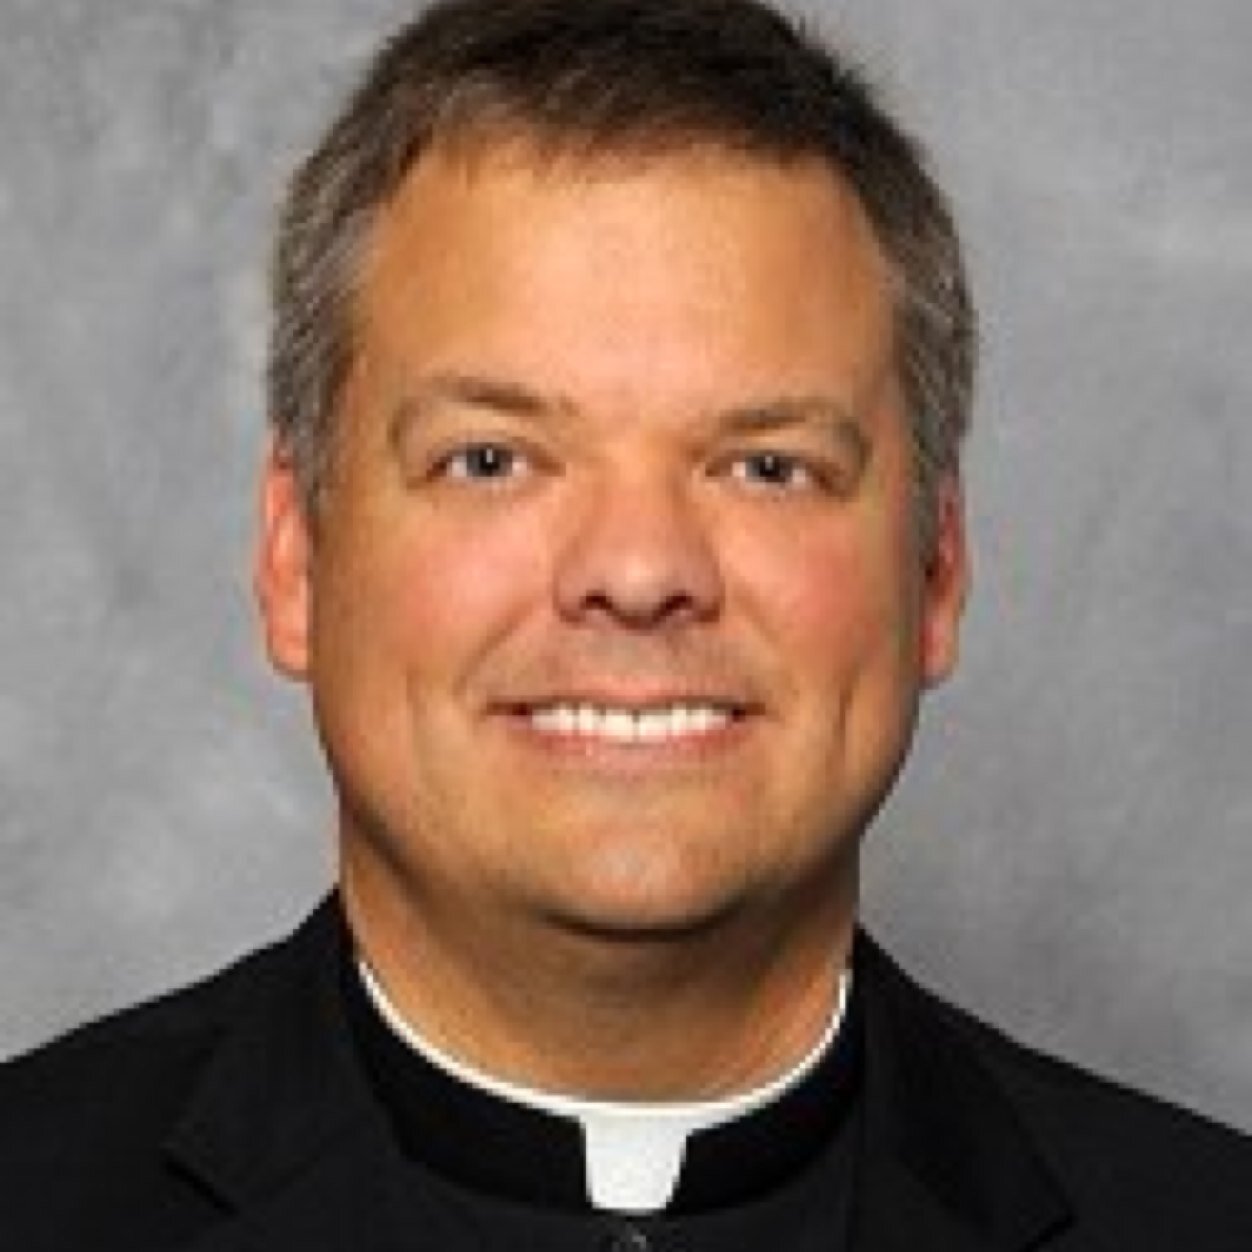 Ordained in 2004, I am a priest for the Archdiocese of Louisville serving as Pastor of St. Patrick Catholic Church and Vicar for Priests.